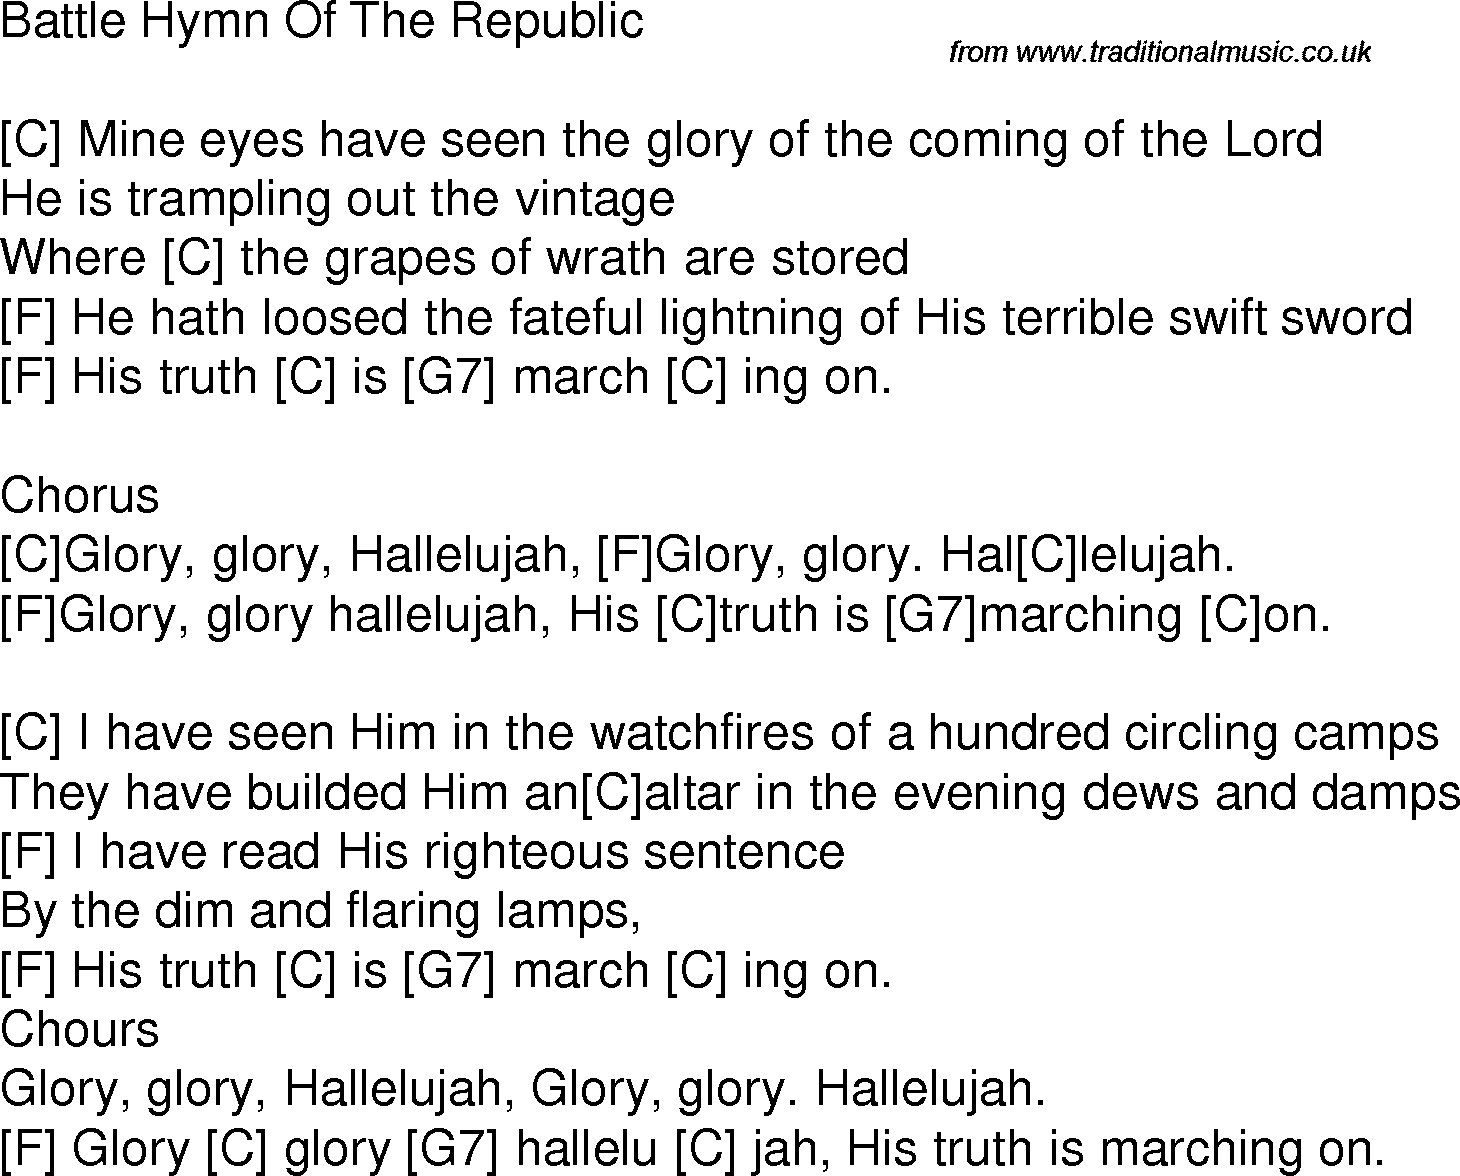 Old time song lyrics with chords for Battle Hymn Of The Republic G